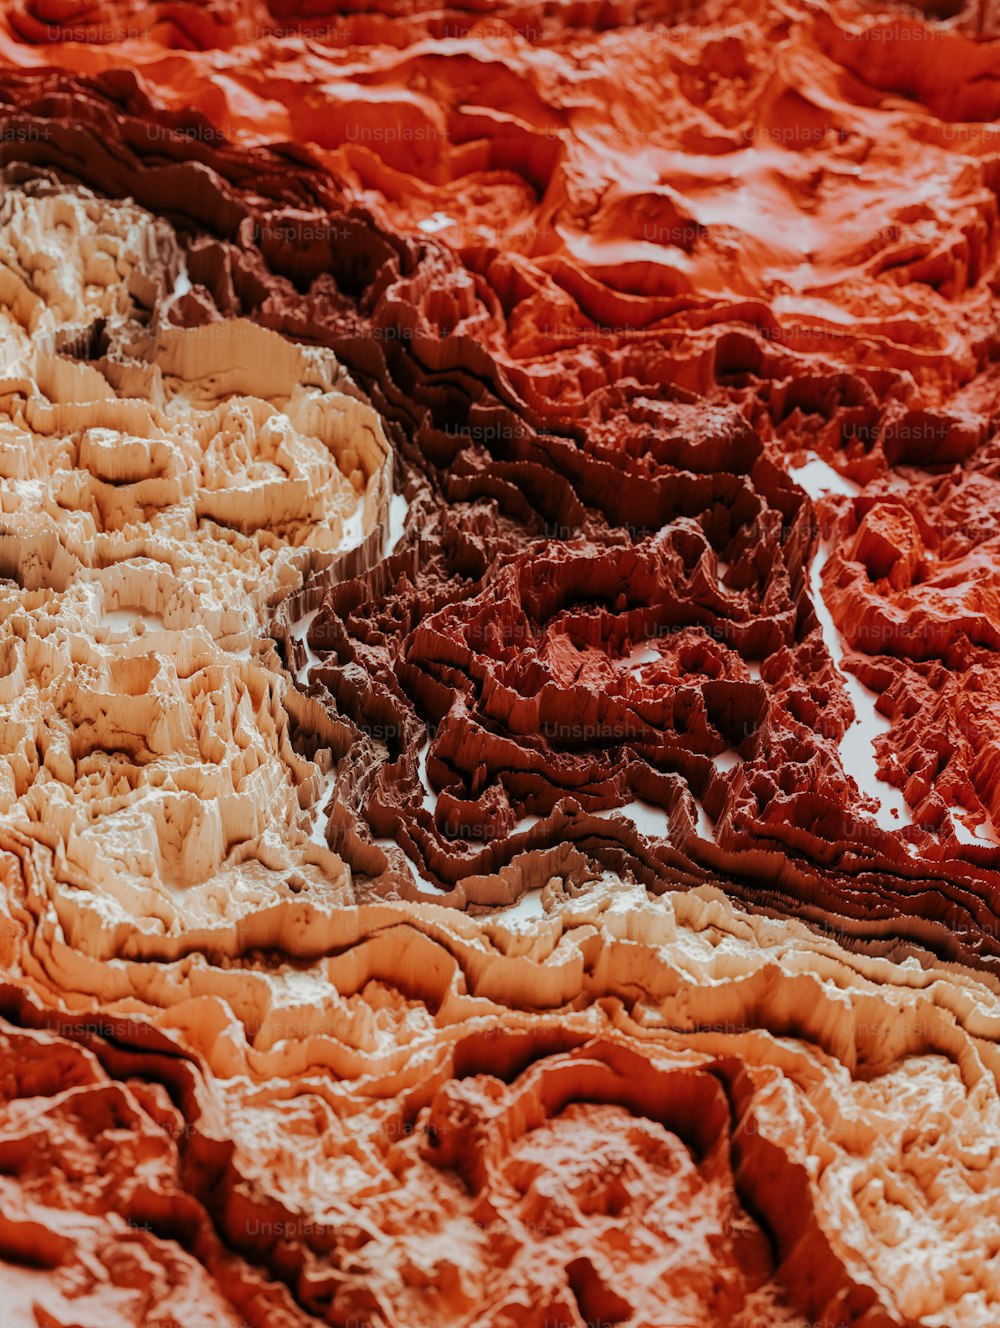 a close up of a red and brown substance